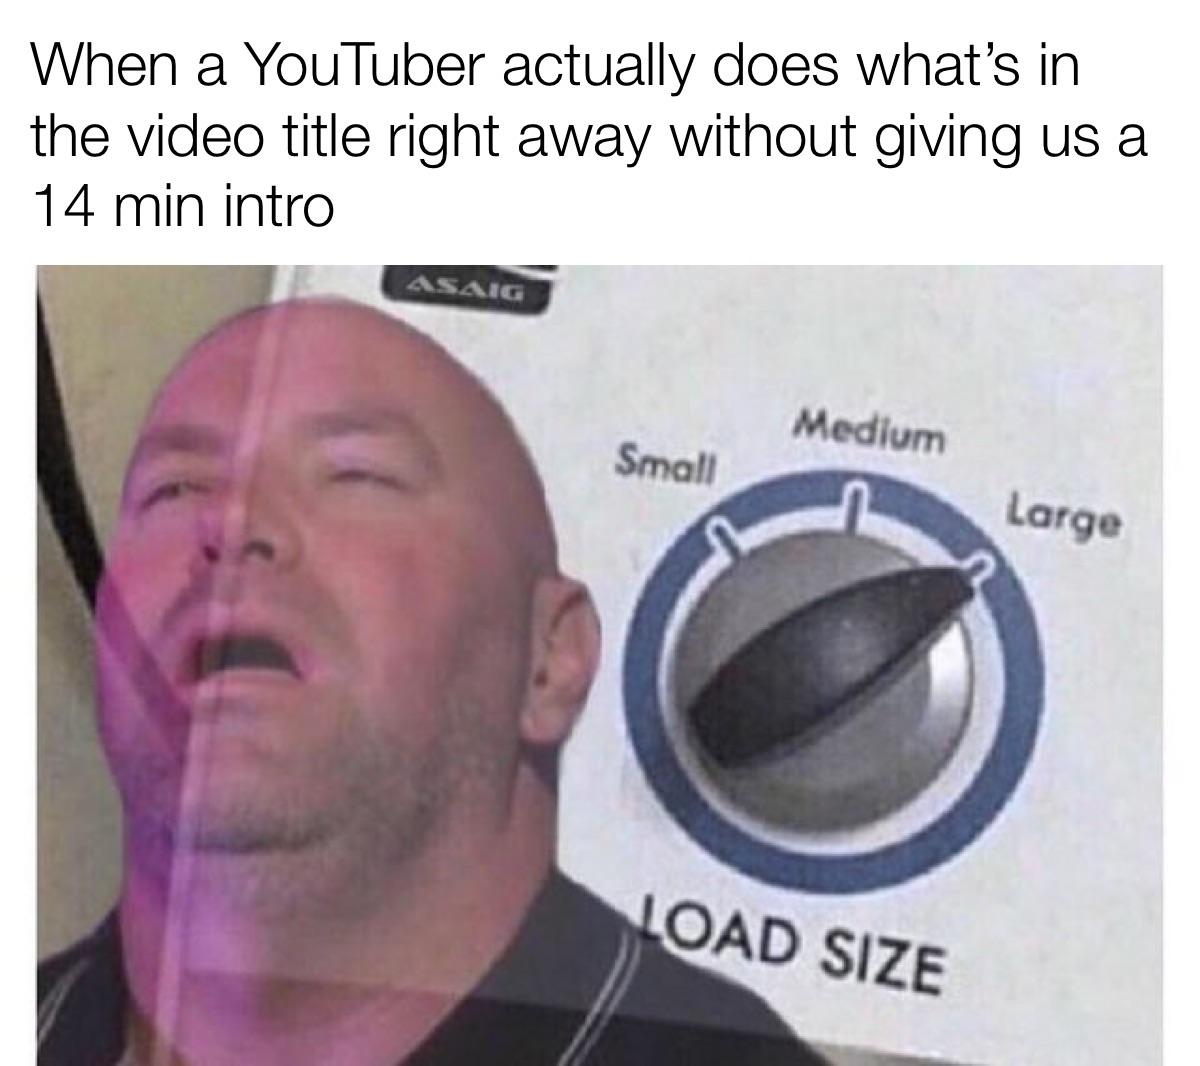 funny memes and random pics - load size large dana white - When a YouTuber actually does what's in the video title right away without giving us a 14 min intro Asaig Medium Small Large Load Size